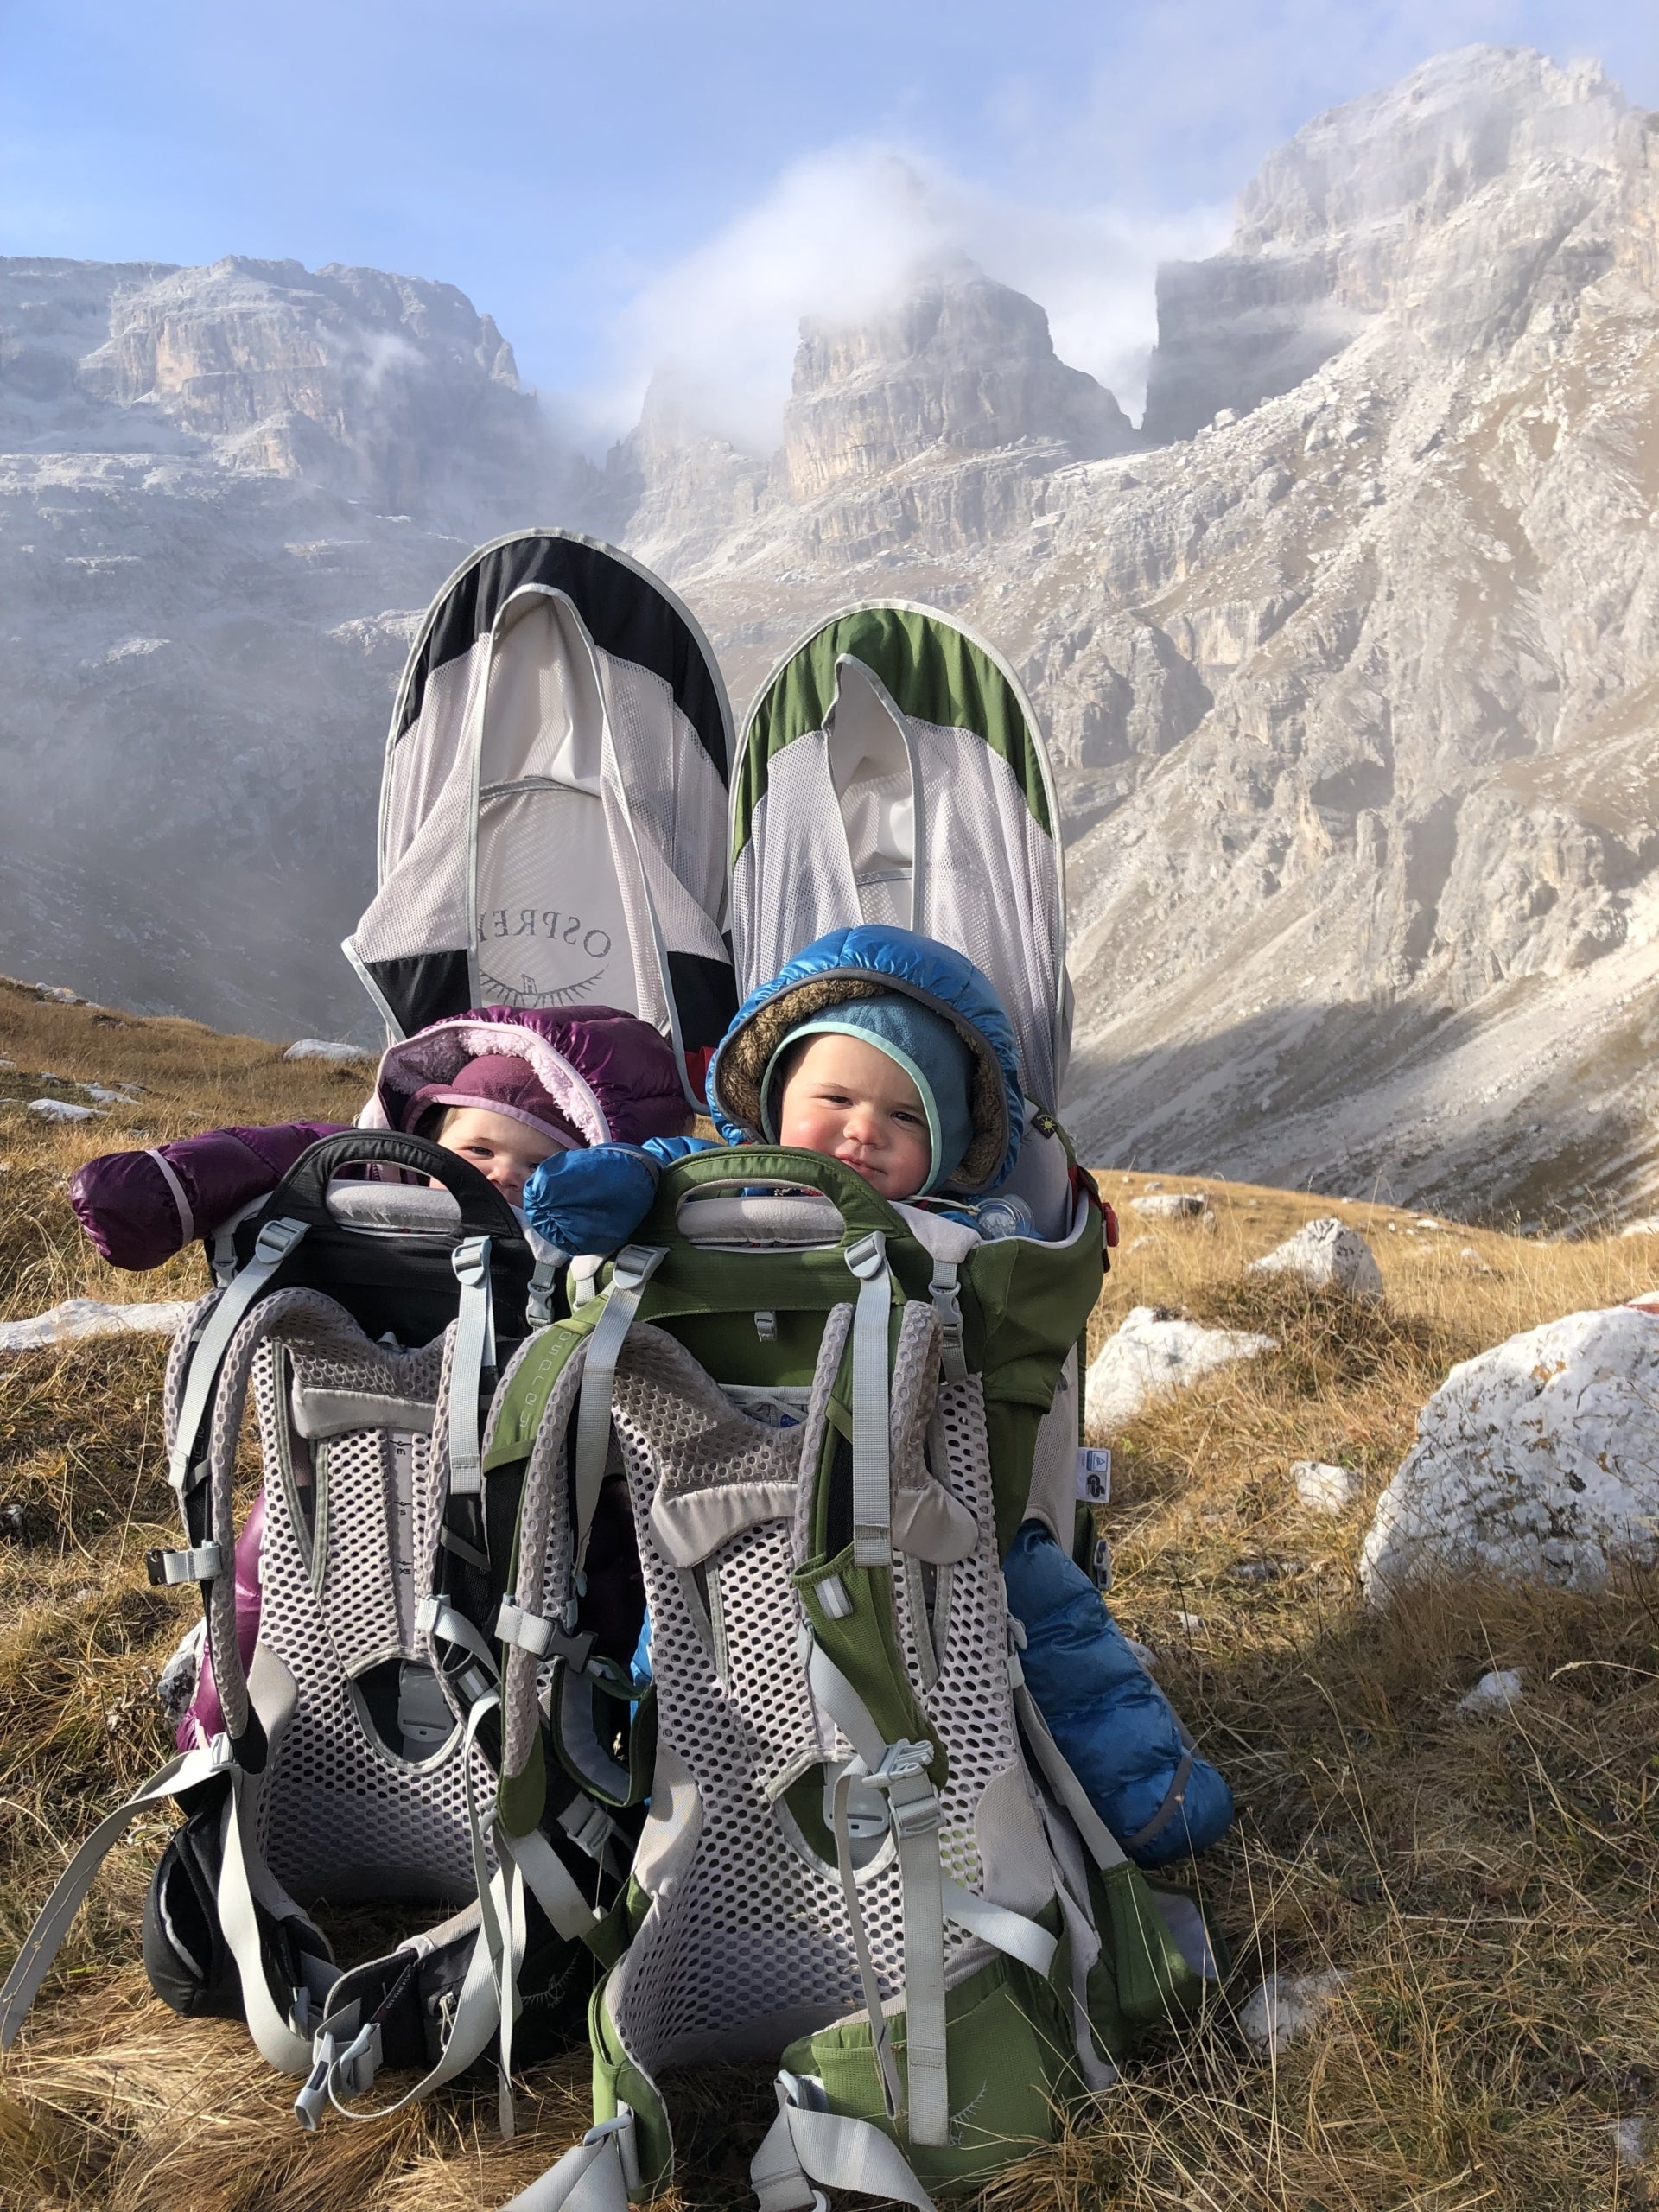 The twins, learning to love the mountains. Photo: Jasmin Caton.